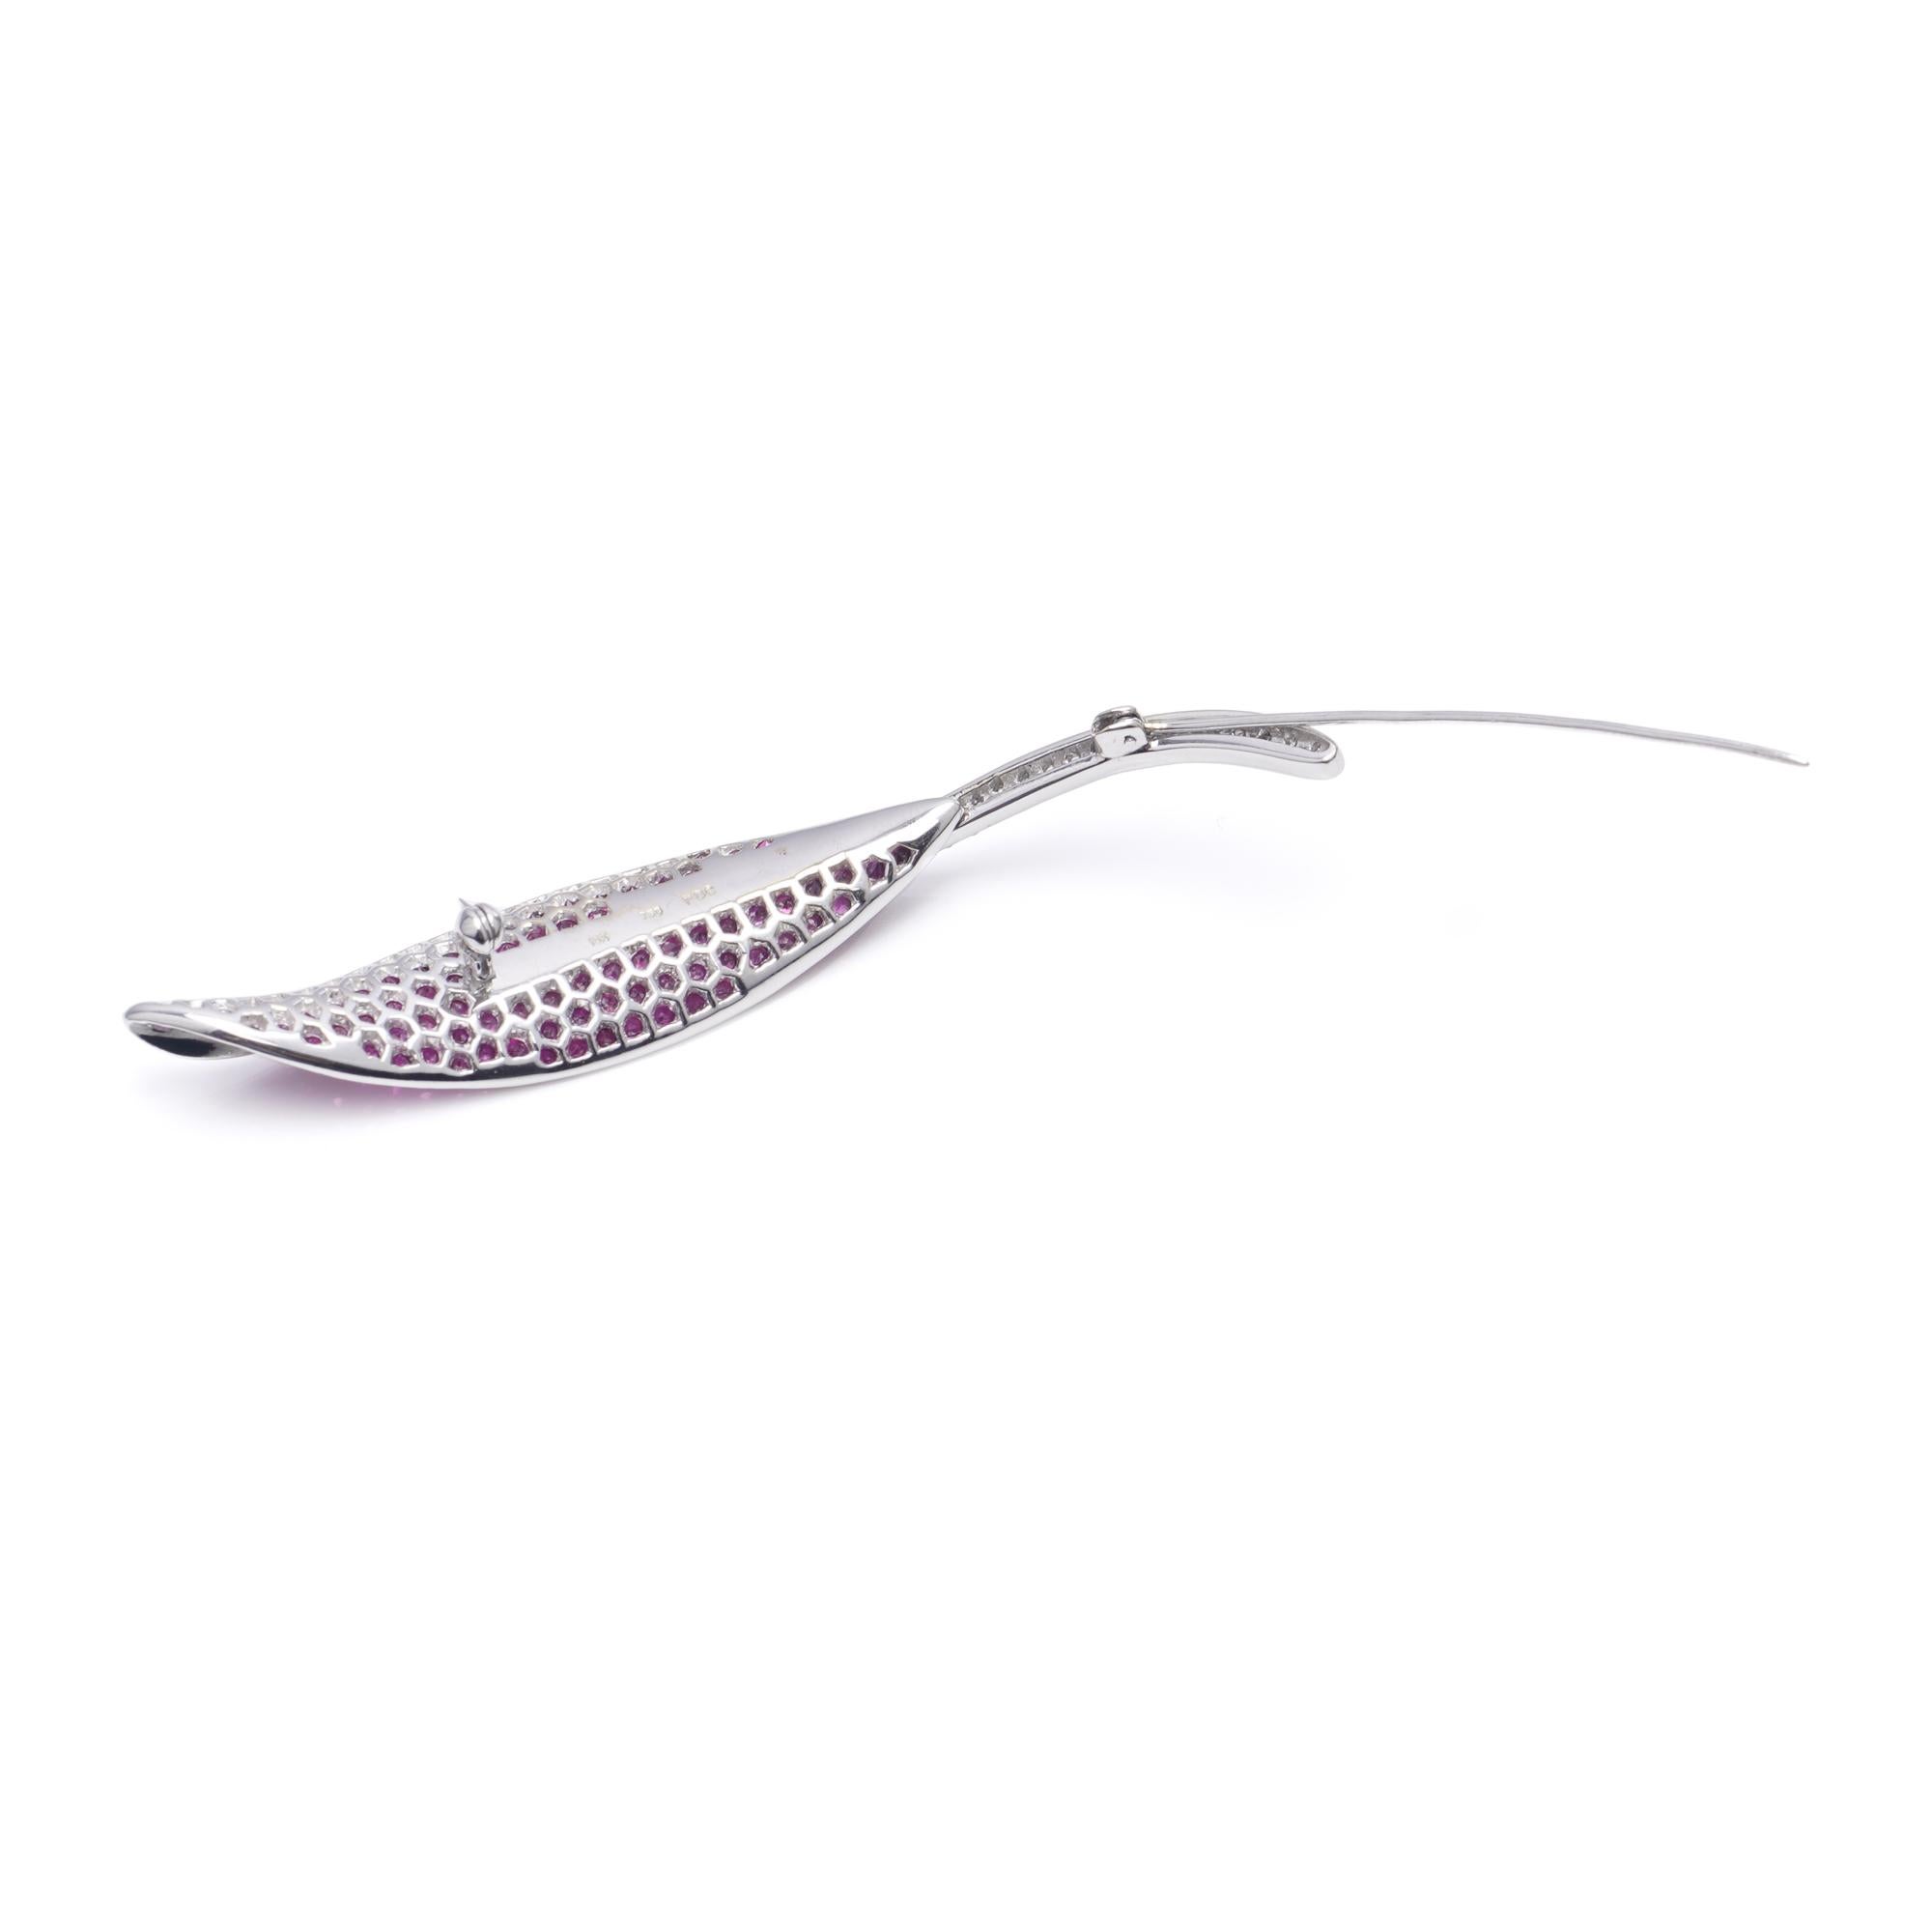 Vintage 18kt. white leaf-shaped brooch, set with rubies and diamonds 2